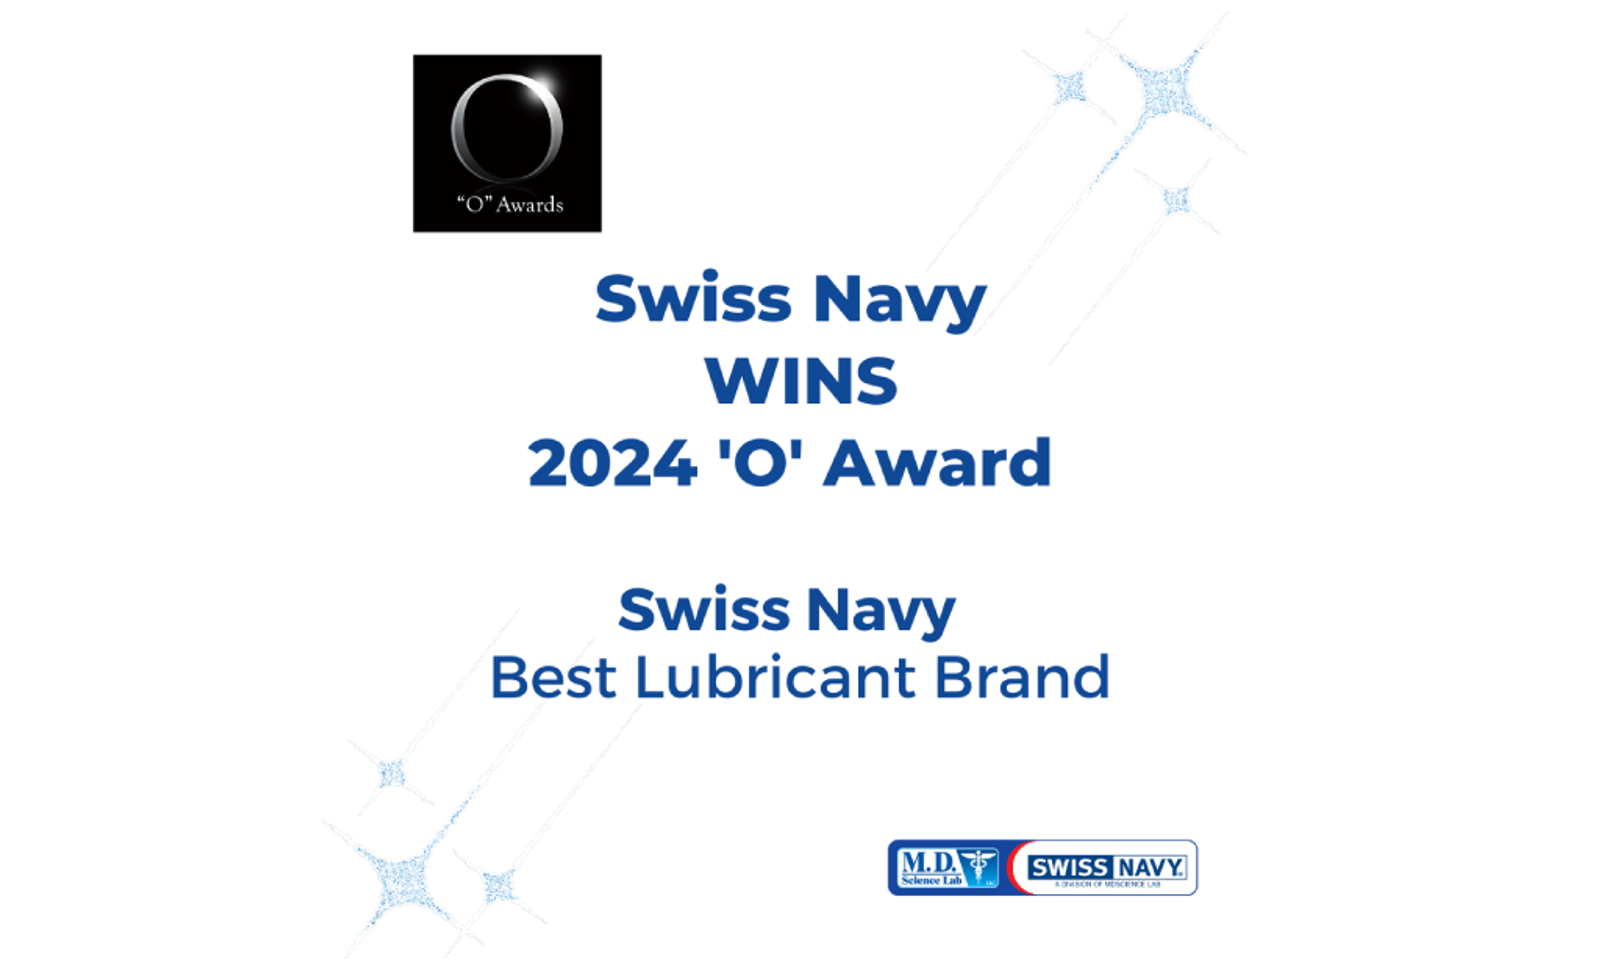 Swiss Navy Wins 2024 ‘O’ Award for Best Lubricant Brand